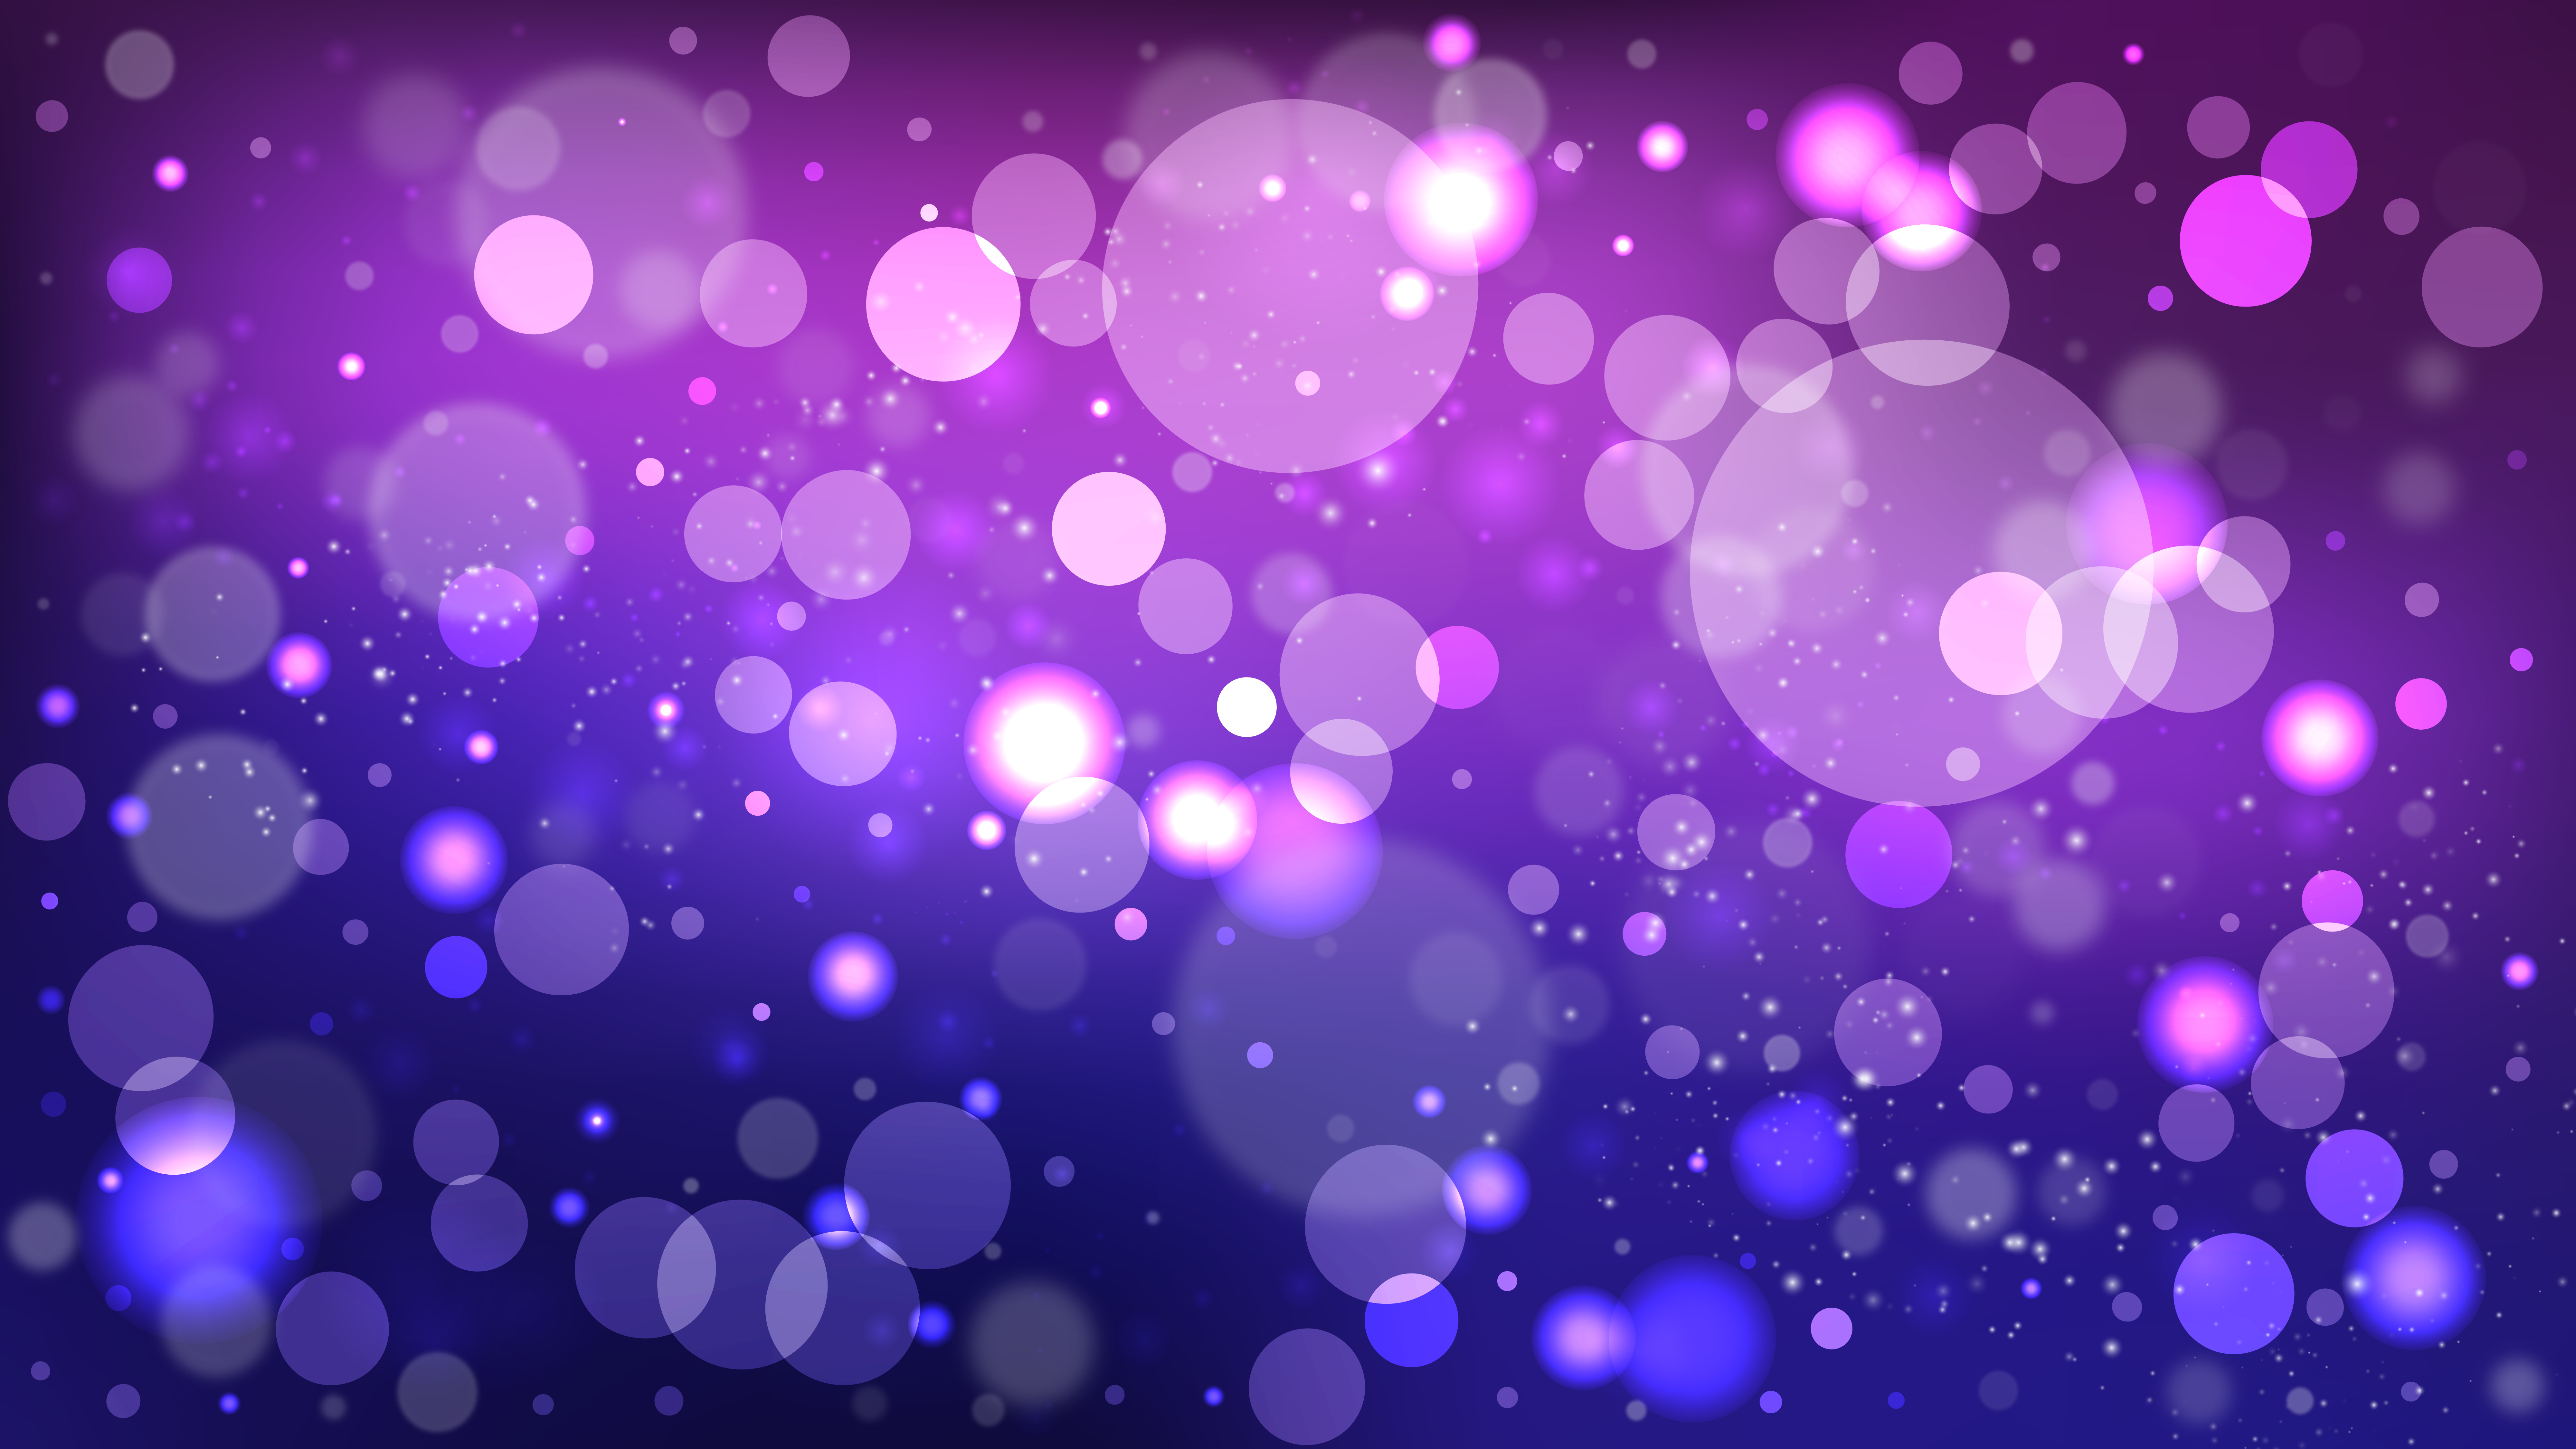 Free Abstract Blue and Purple Blurred Bokeh Background